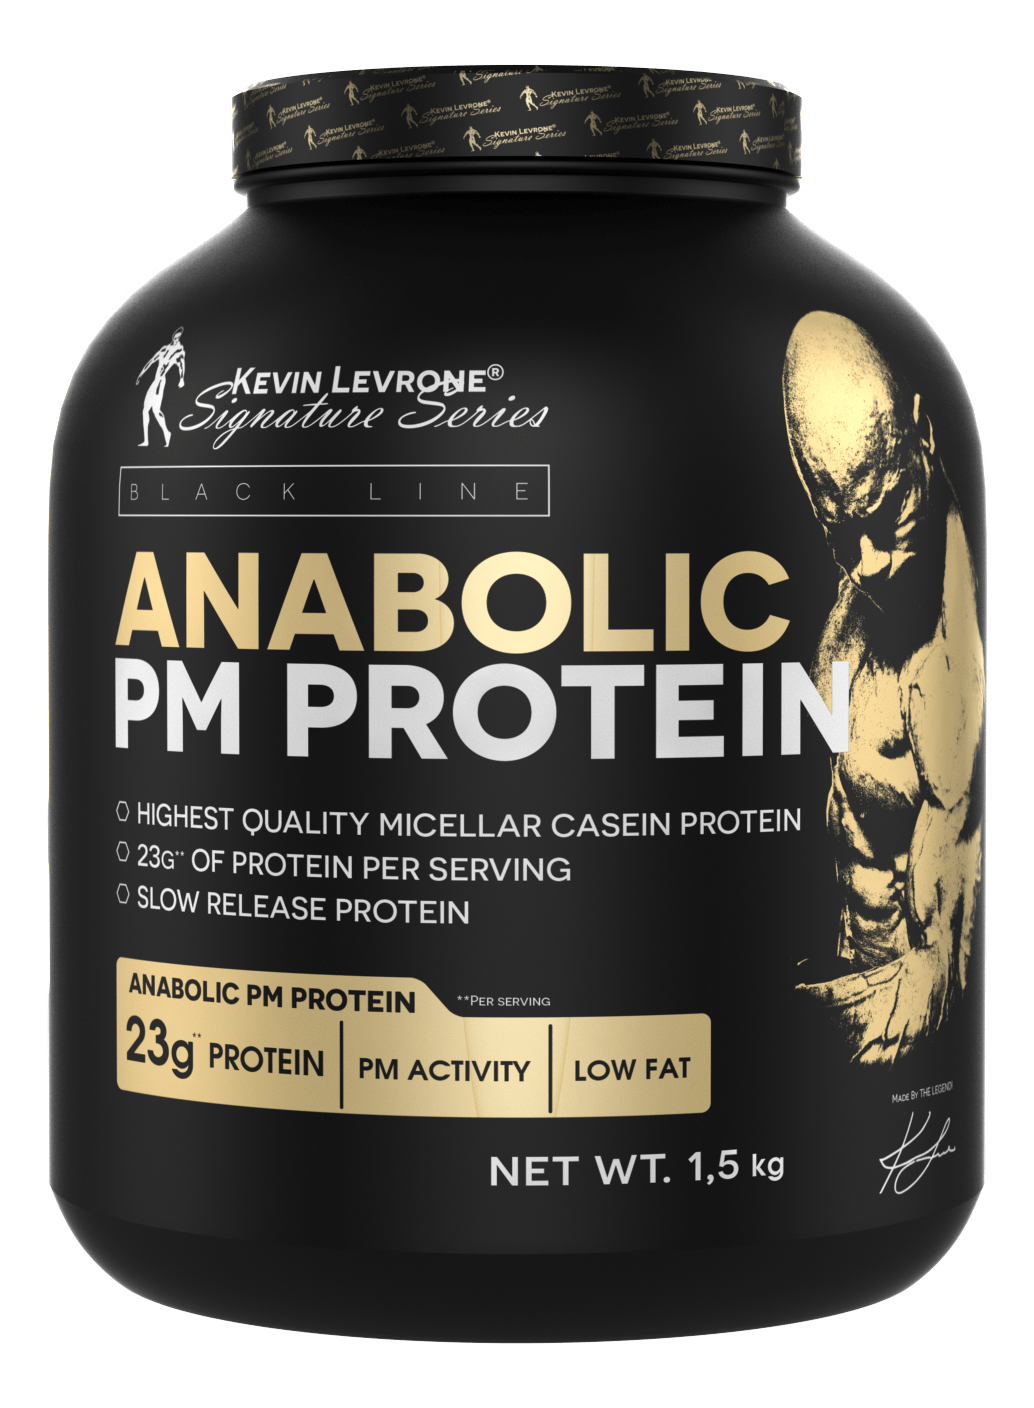 Протеин Kevin Levrone Anabolic PM Protein, 1.5 кг Ваниль,  ml, Kevin Levrone. Protein. Mass Gain recovery Anti-catabolic properties 